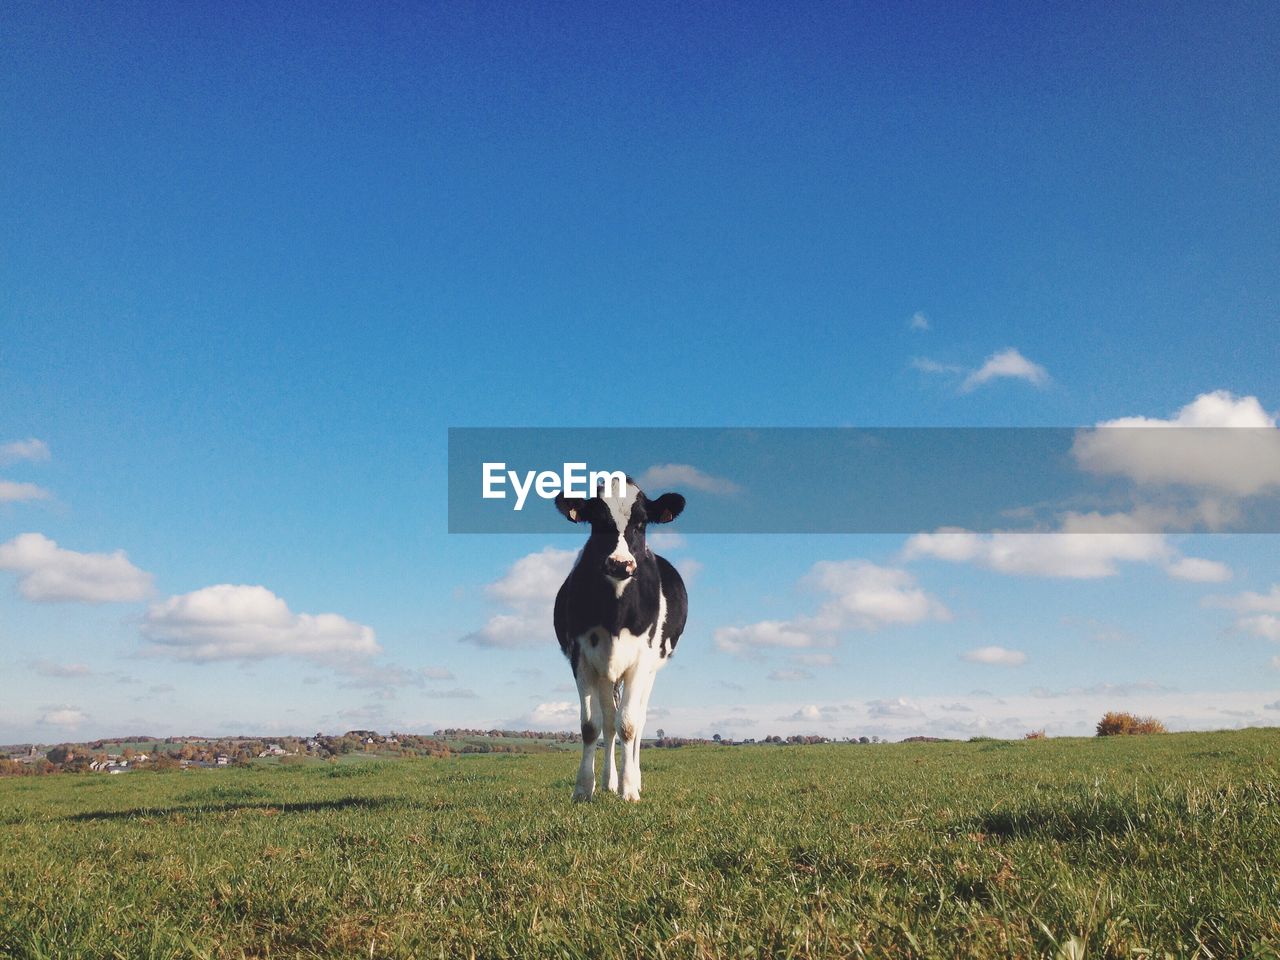 Cow standing on grassy field against blue sky